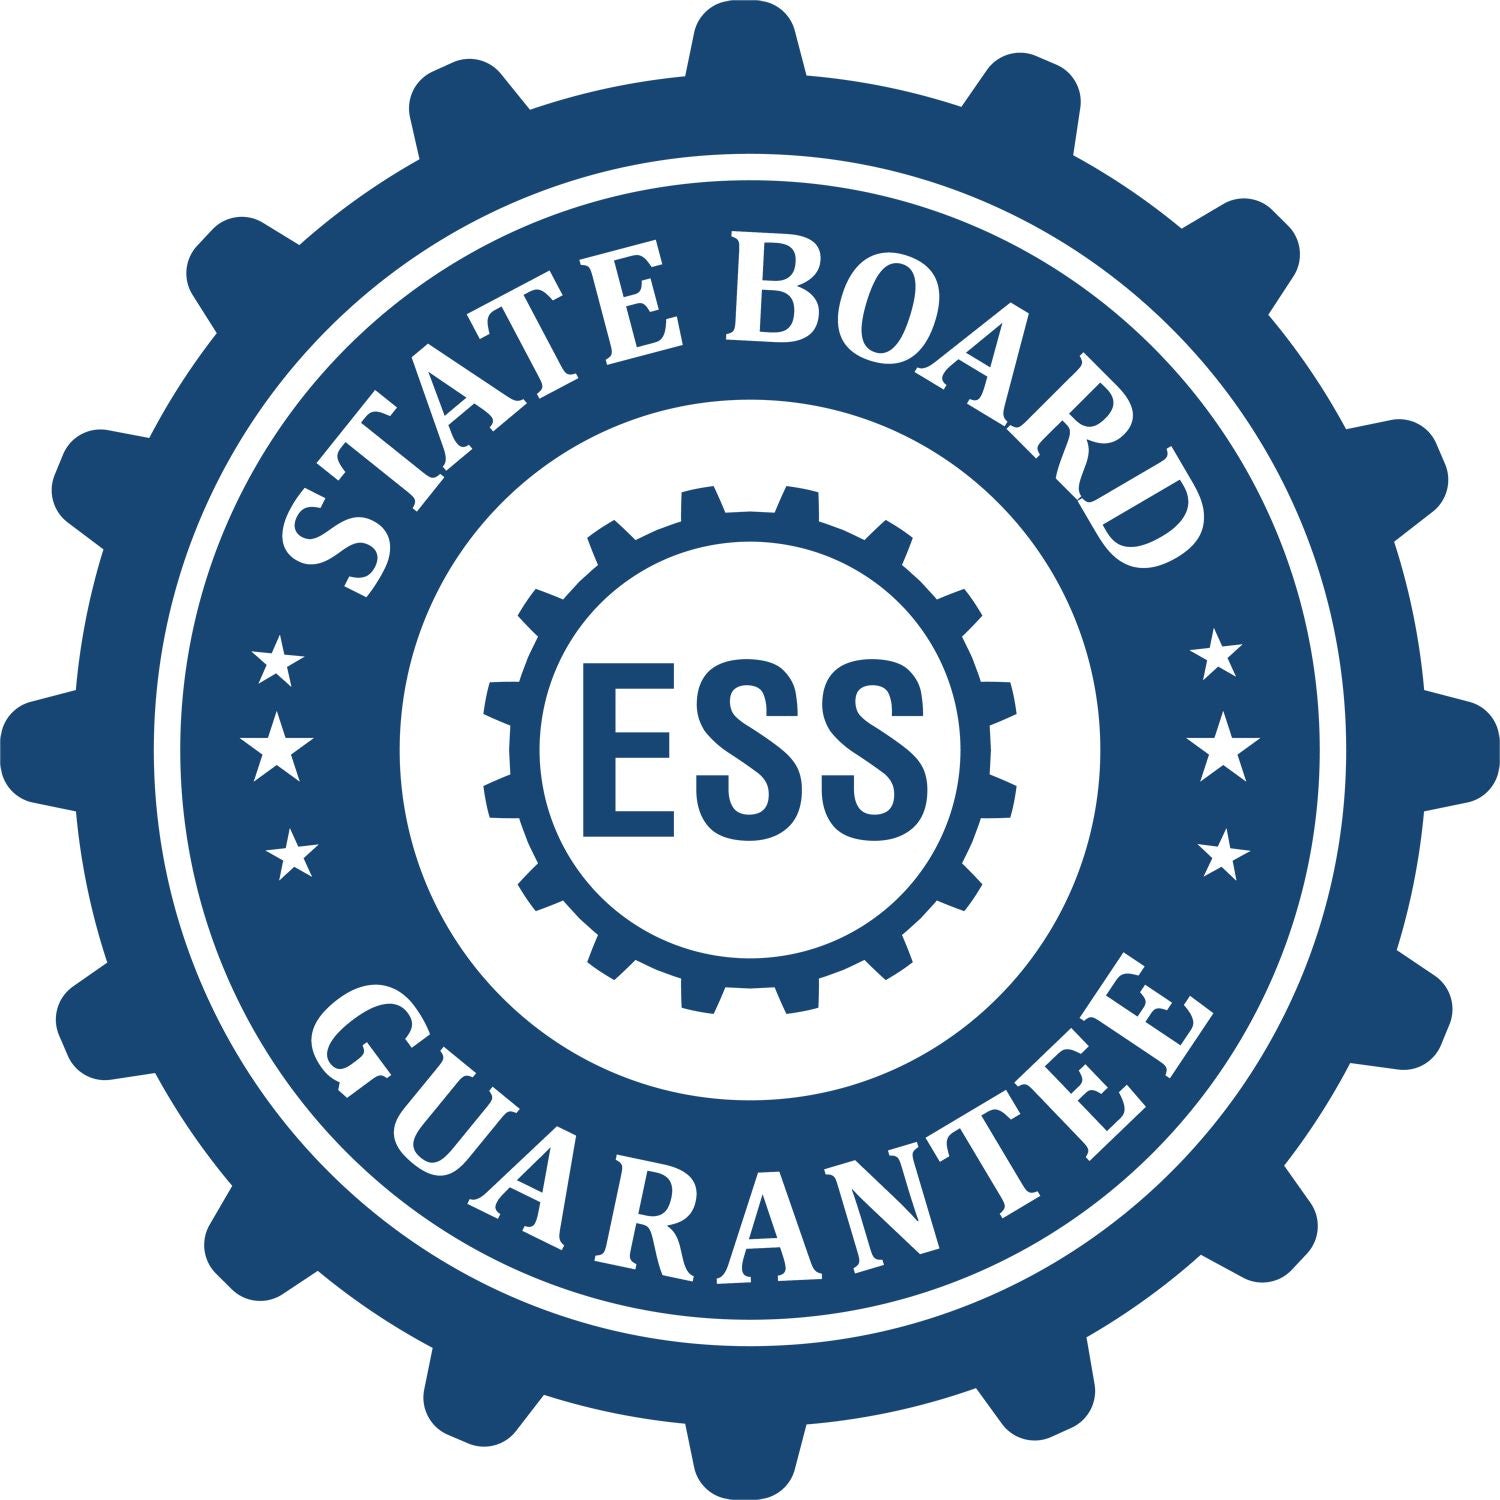 An emblem in a gear shape illustrating a state board guarantee for the Wooden Handle Mississippi State Seal Notary Public Stamp product.